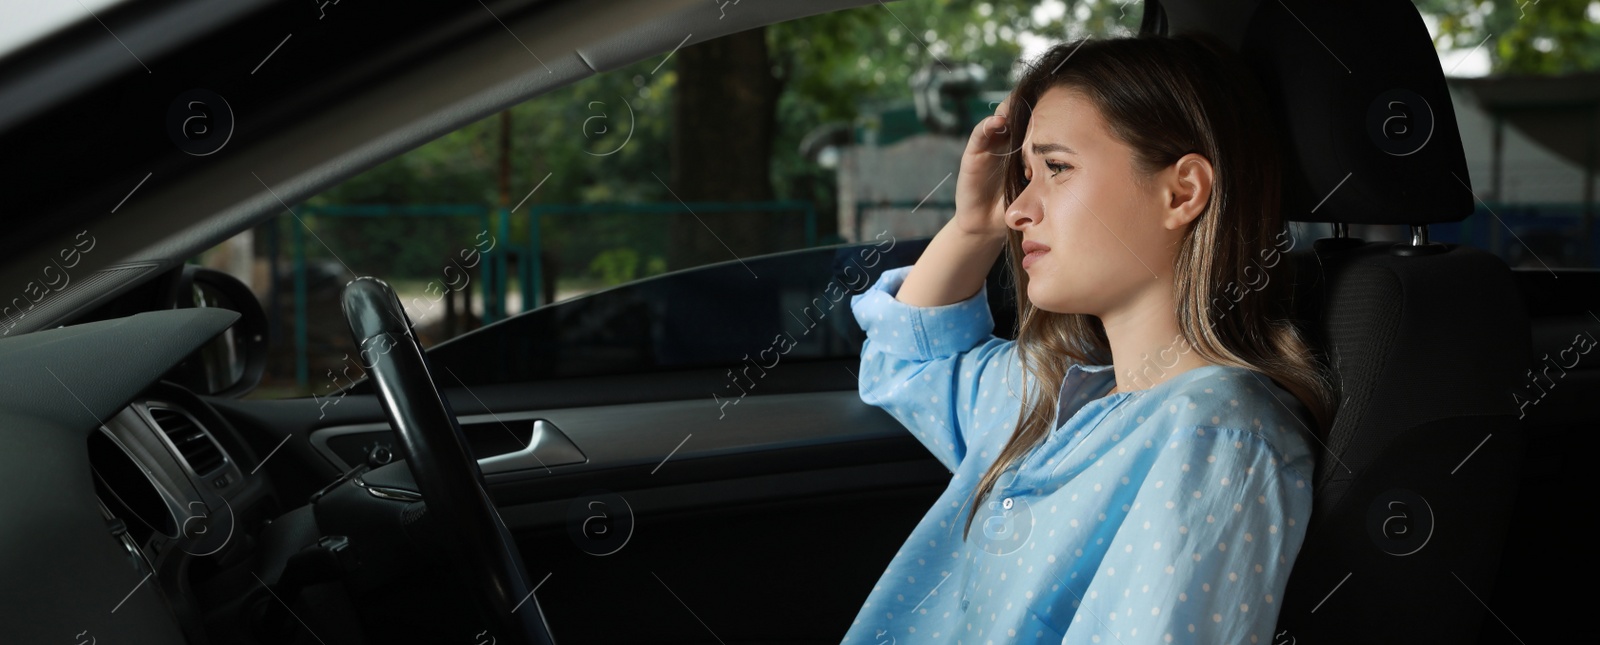 Image of Tired young woman driver's seat of modern car. Banner design